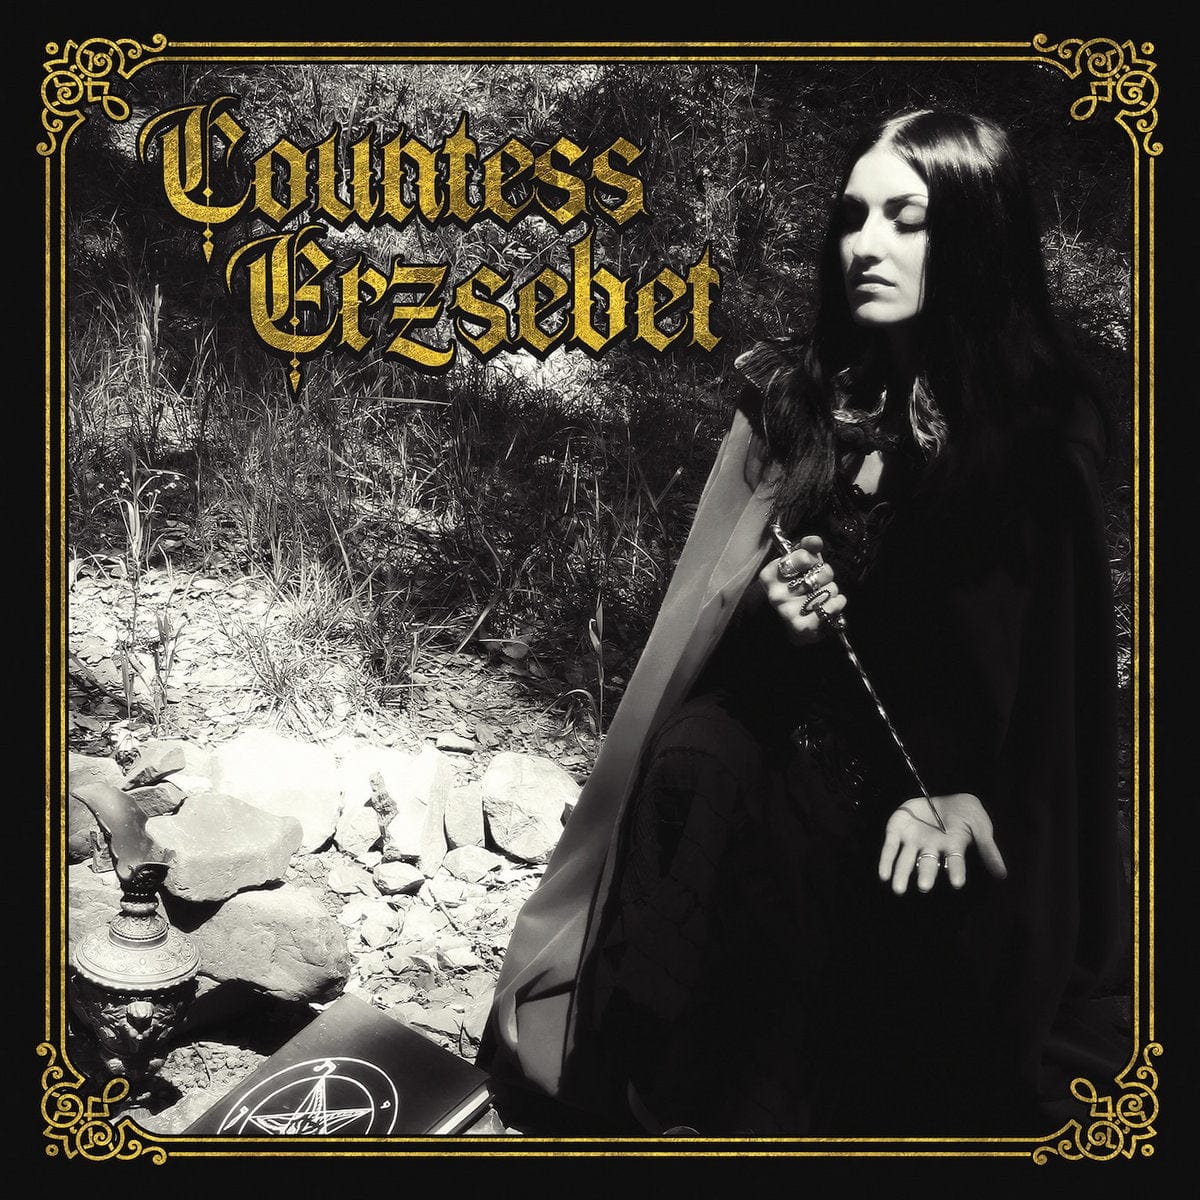 Self-released CD Countess Erzsebet &quot;The Countess Erzsebet&quot; CD